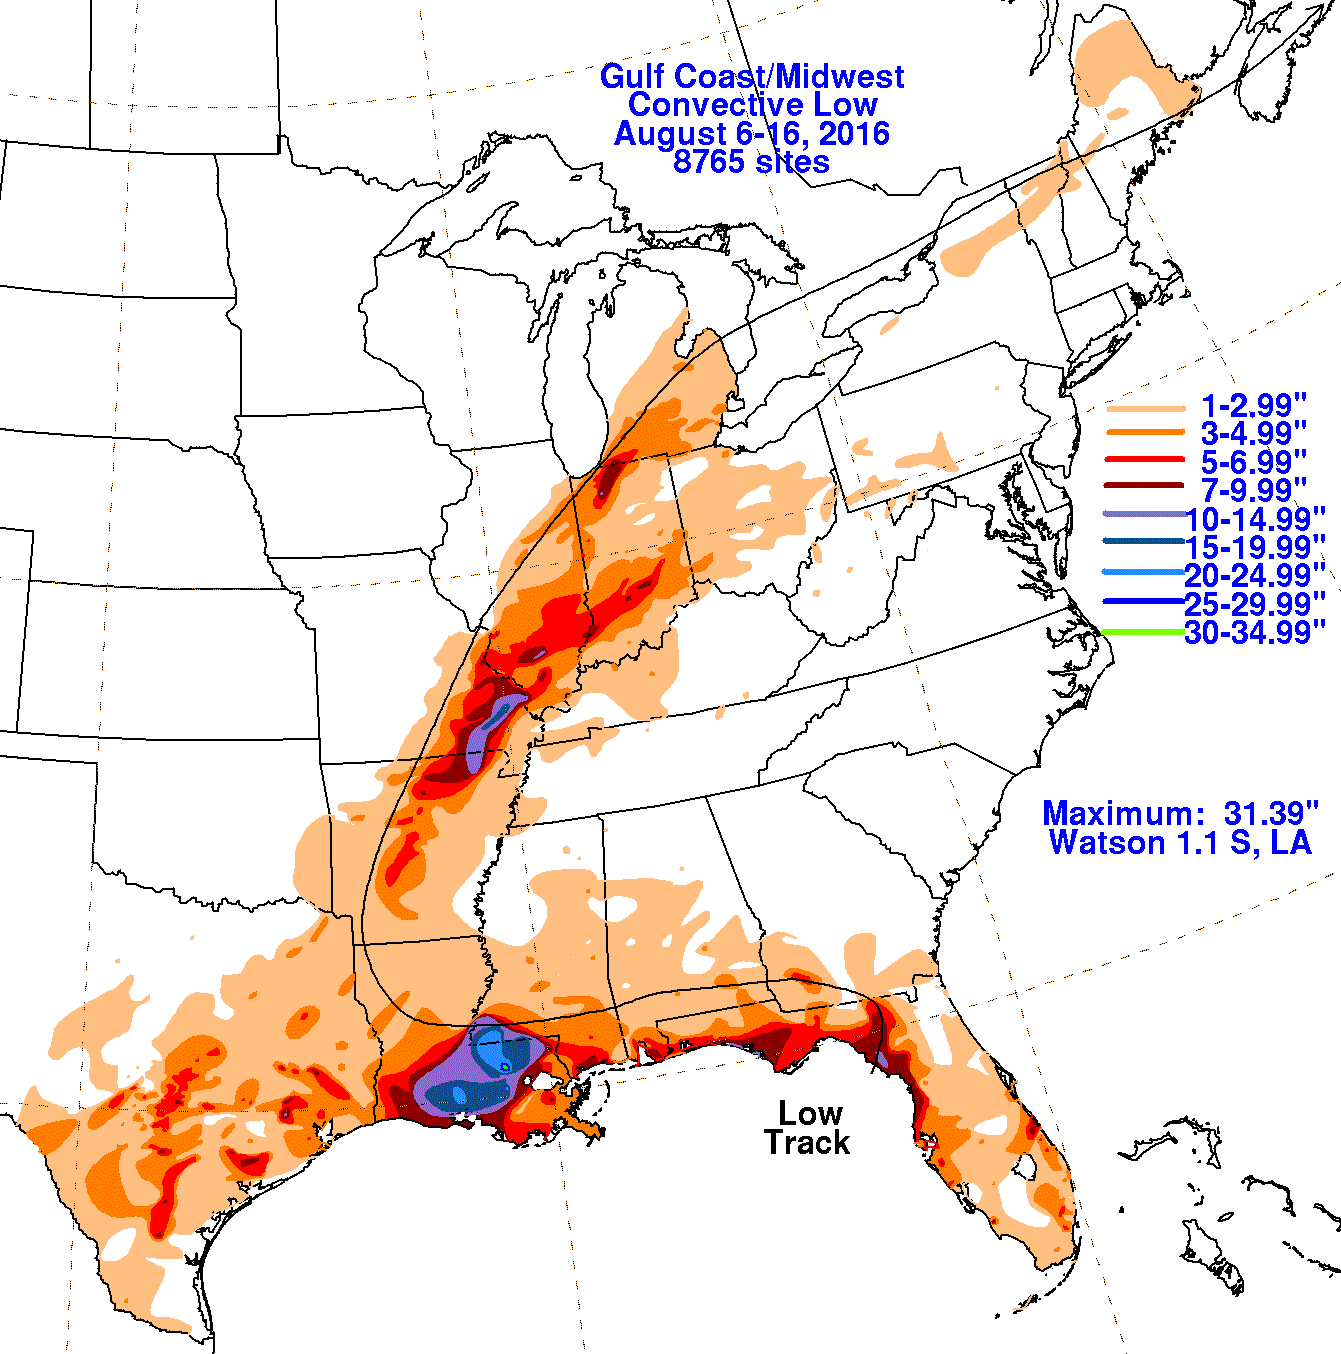 Convective Low (August 2016) Rainfall